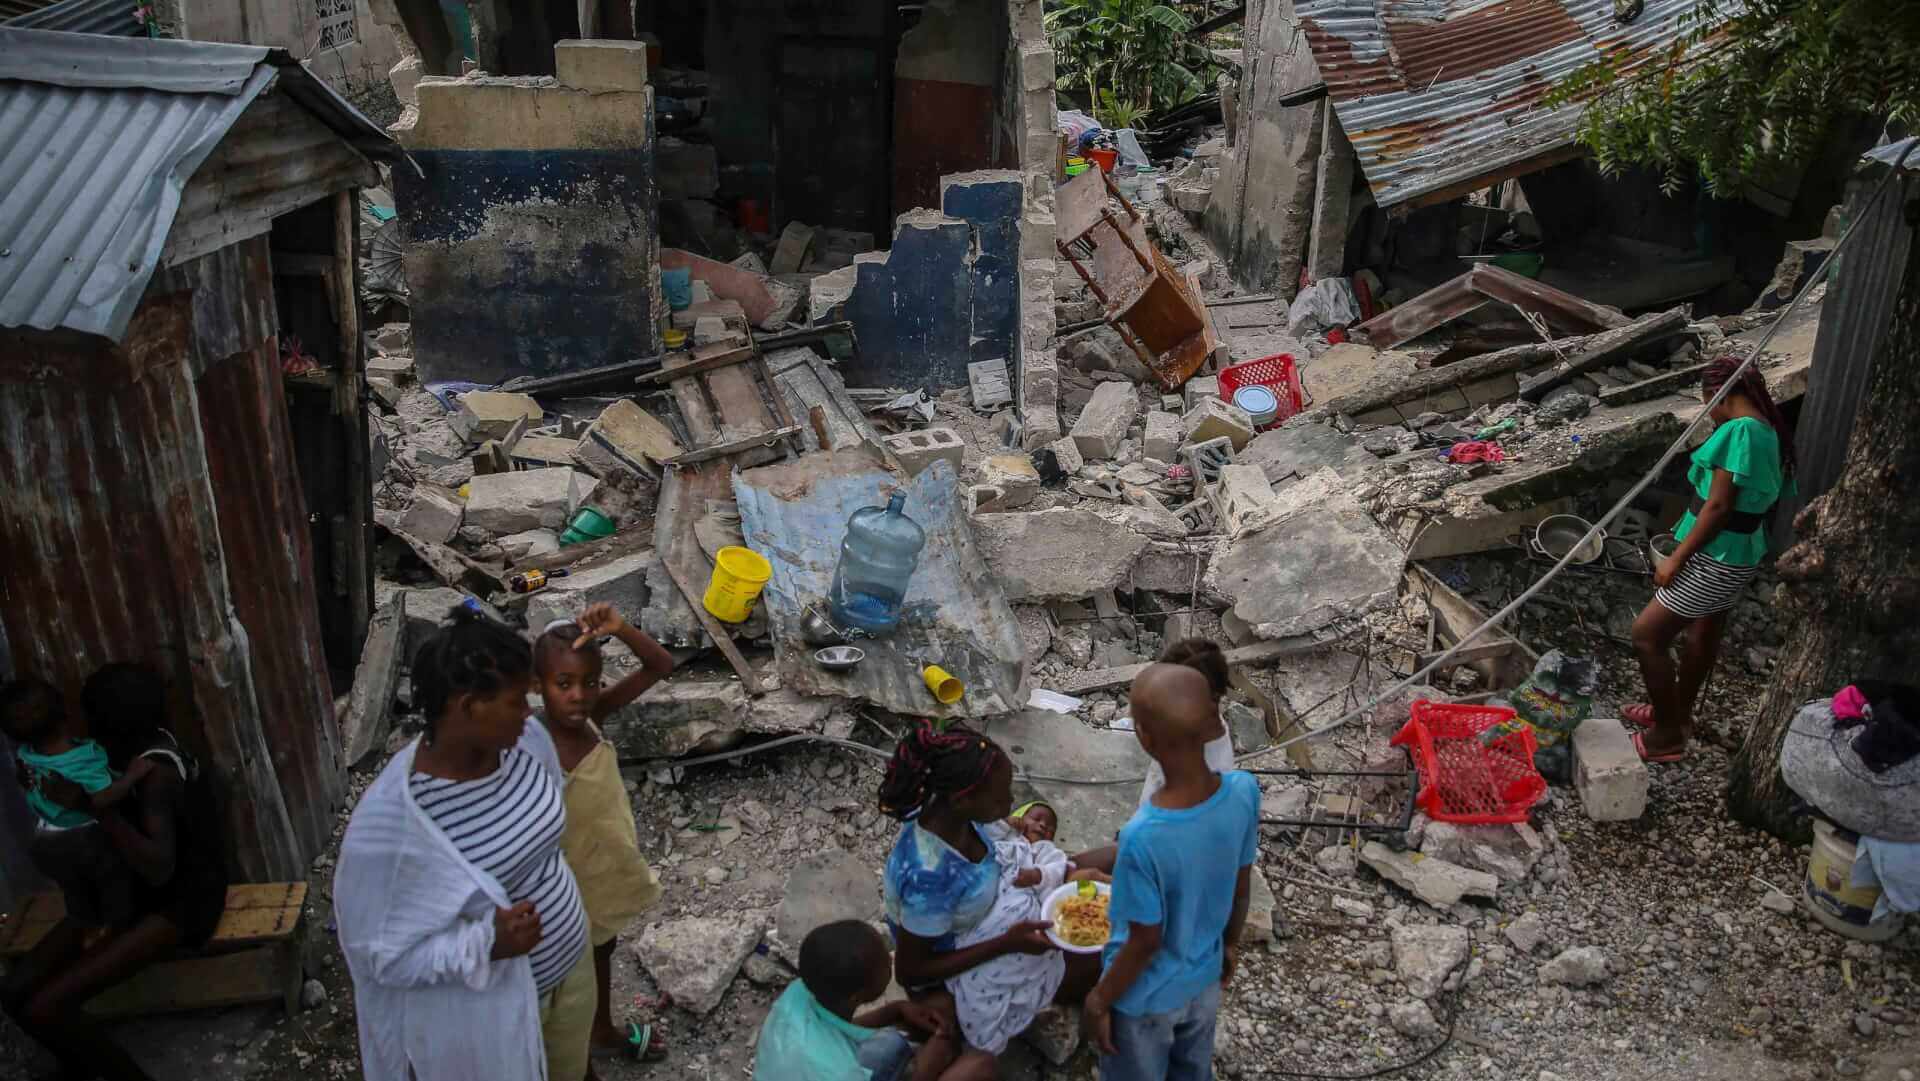 Death Toll From Haiti Earthquake Rises to 1,419, With 30,000 Families Now Homeless